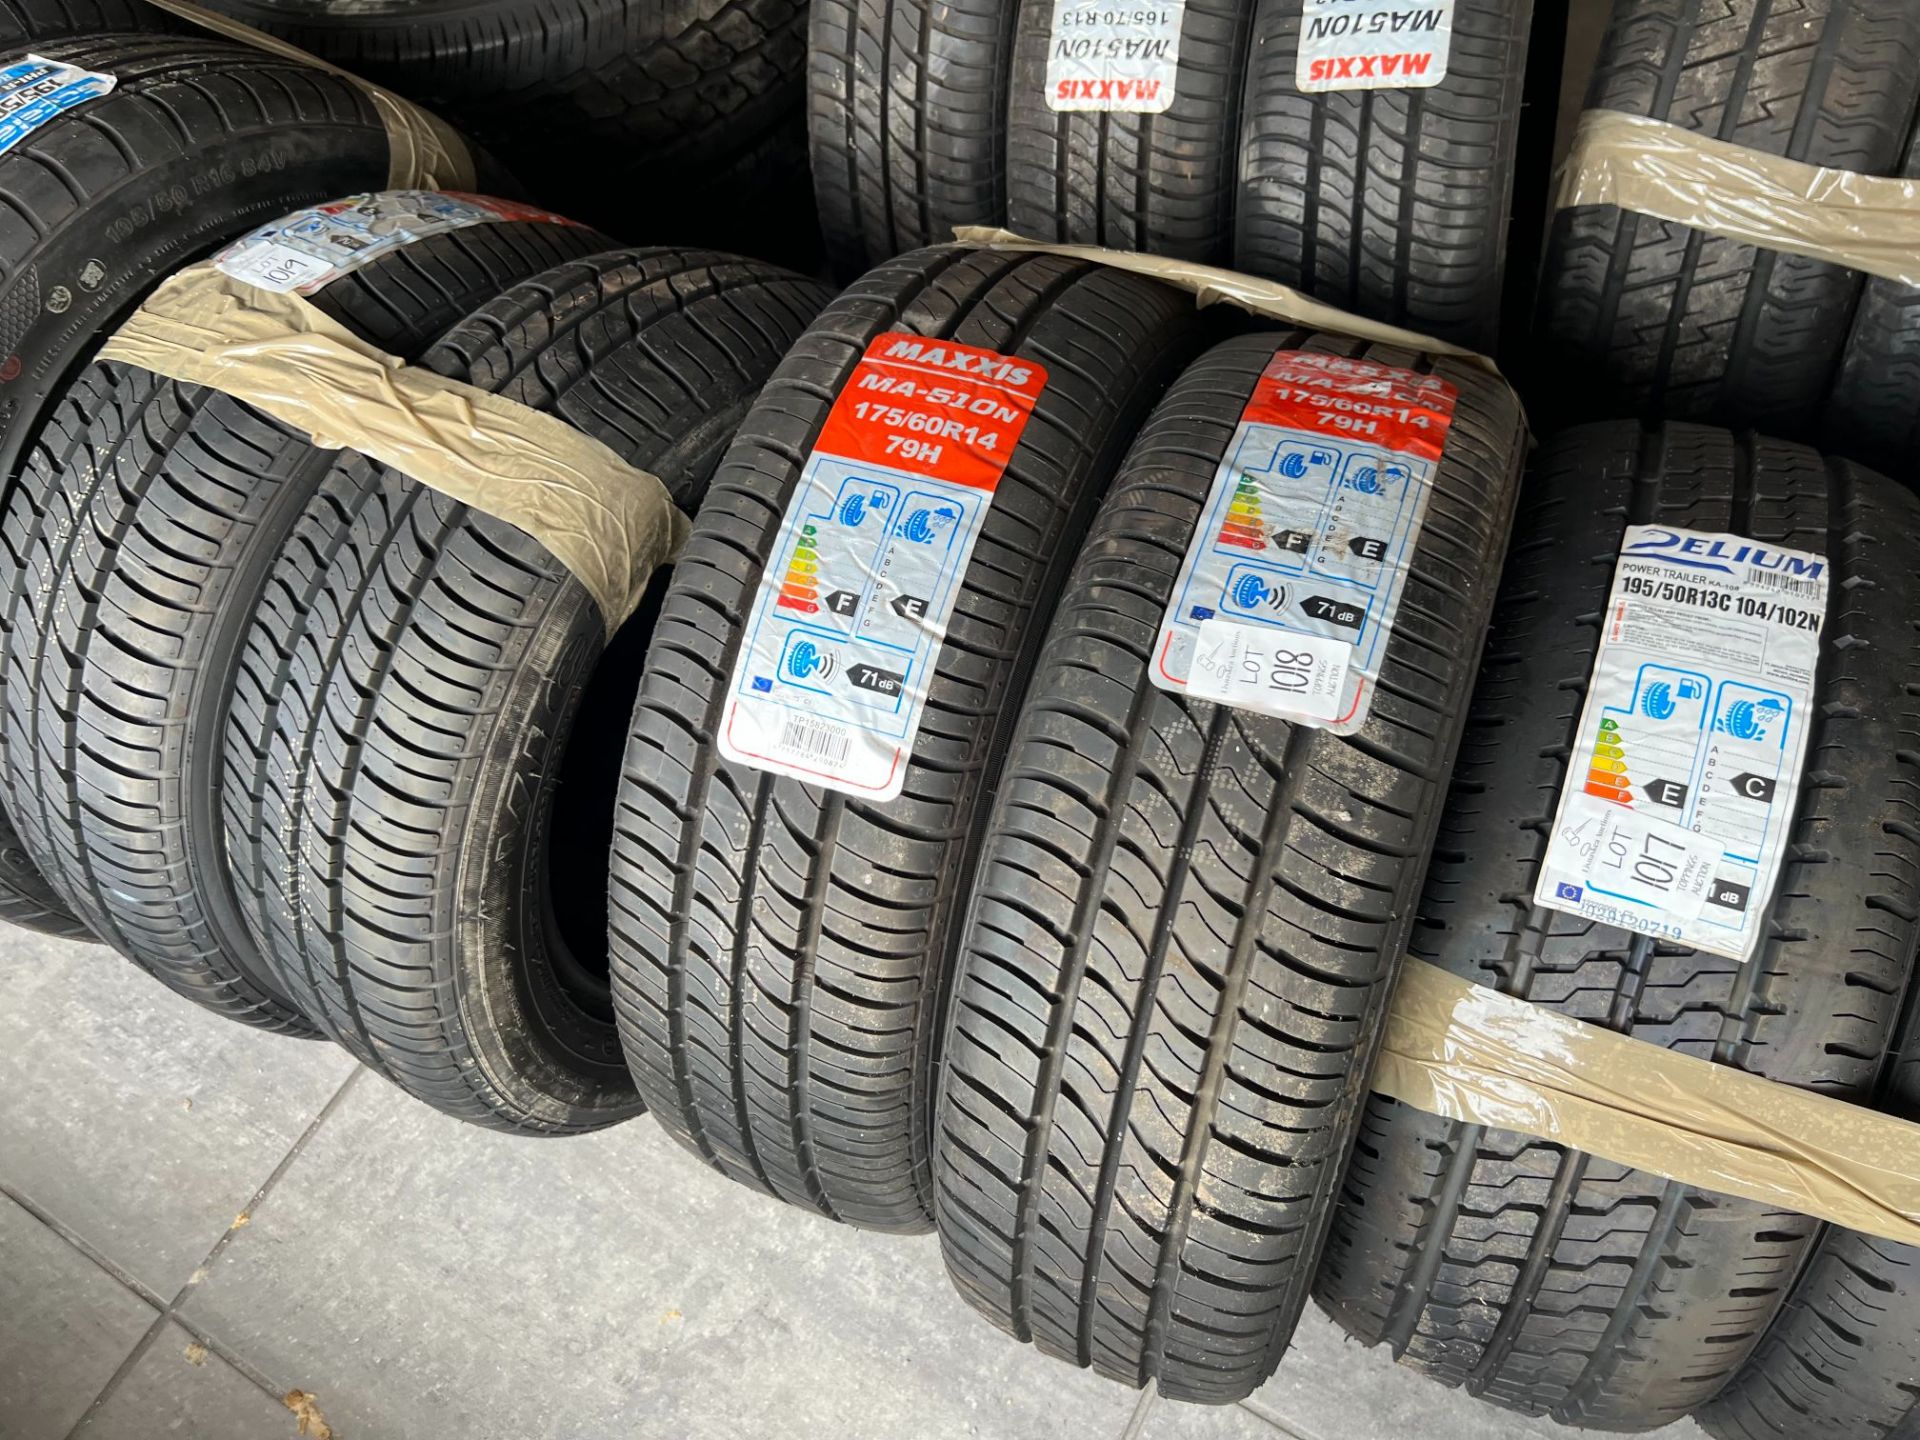 2X MAXXIS 175/60/R14 TYRES (NEW)